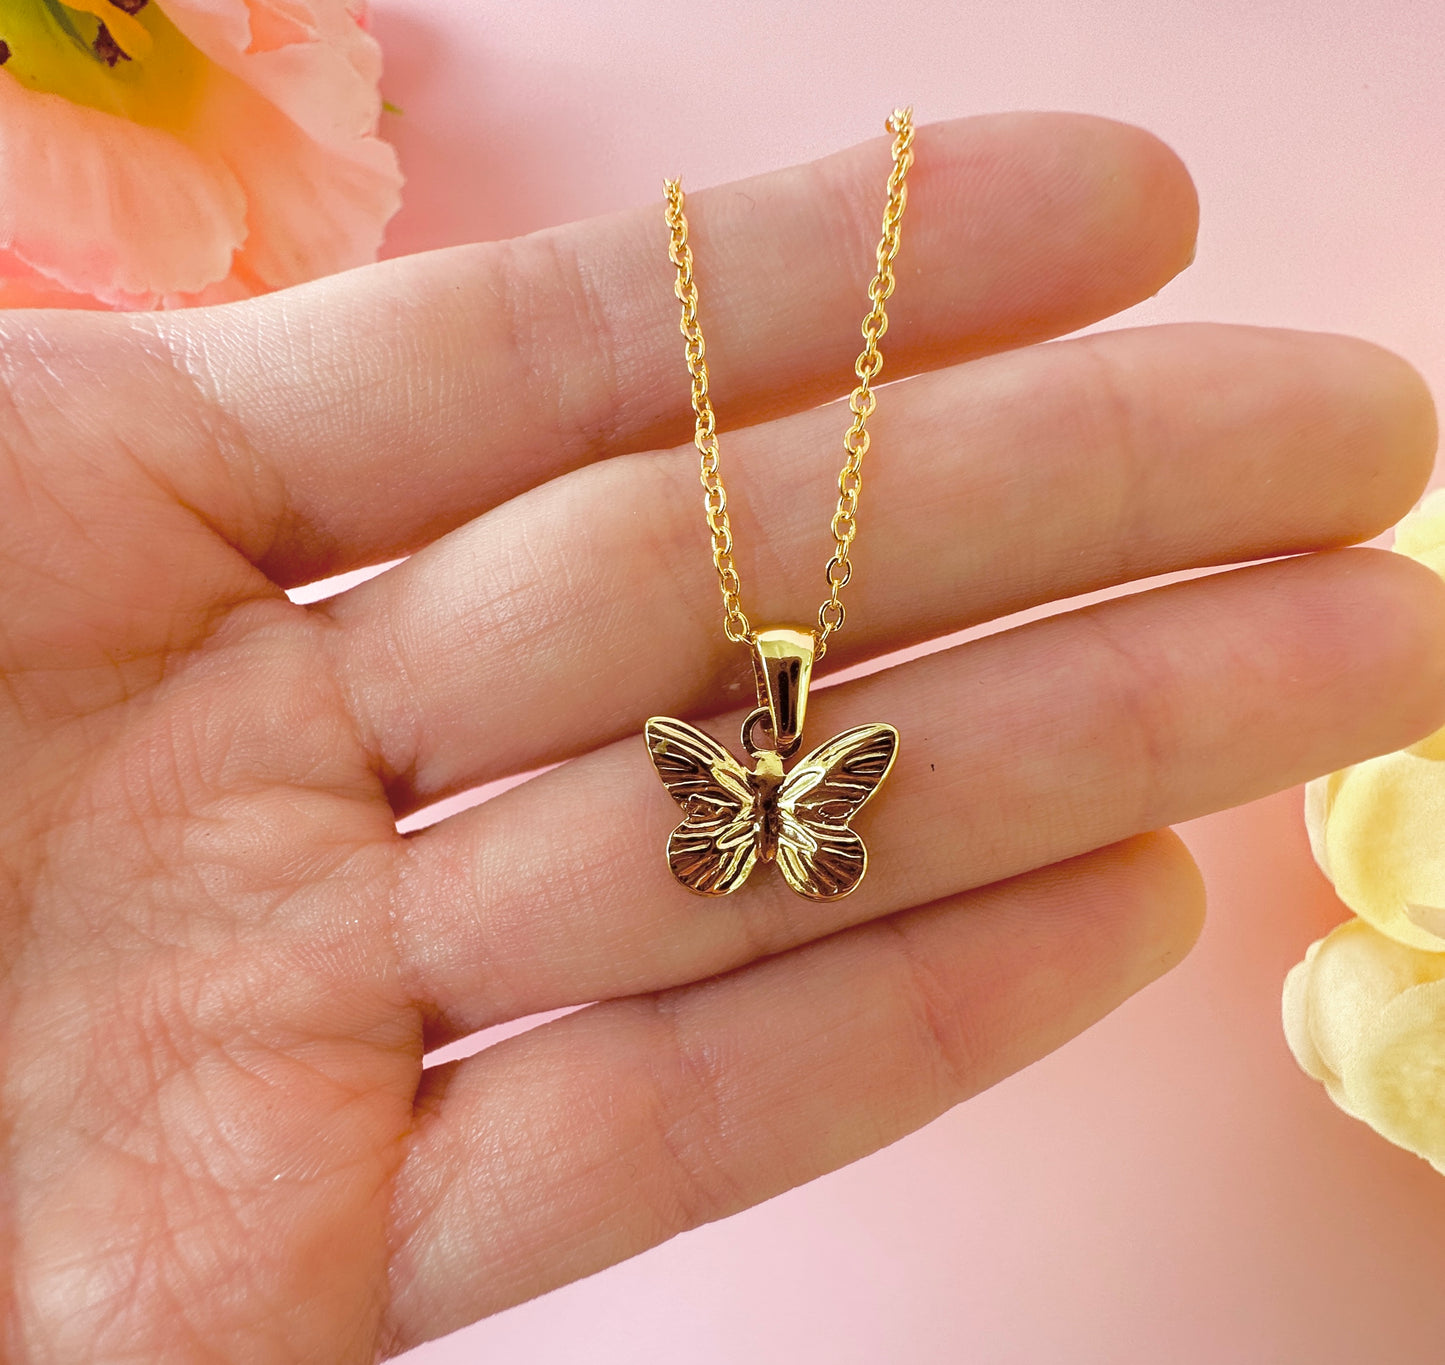 Gold mini Butterfly necklace.